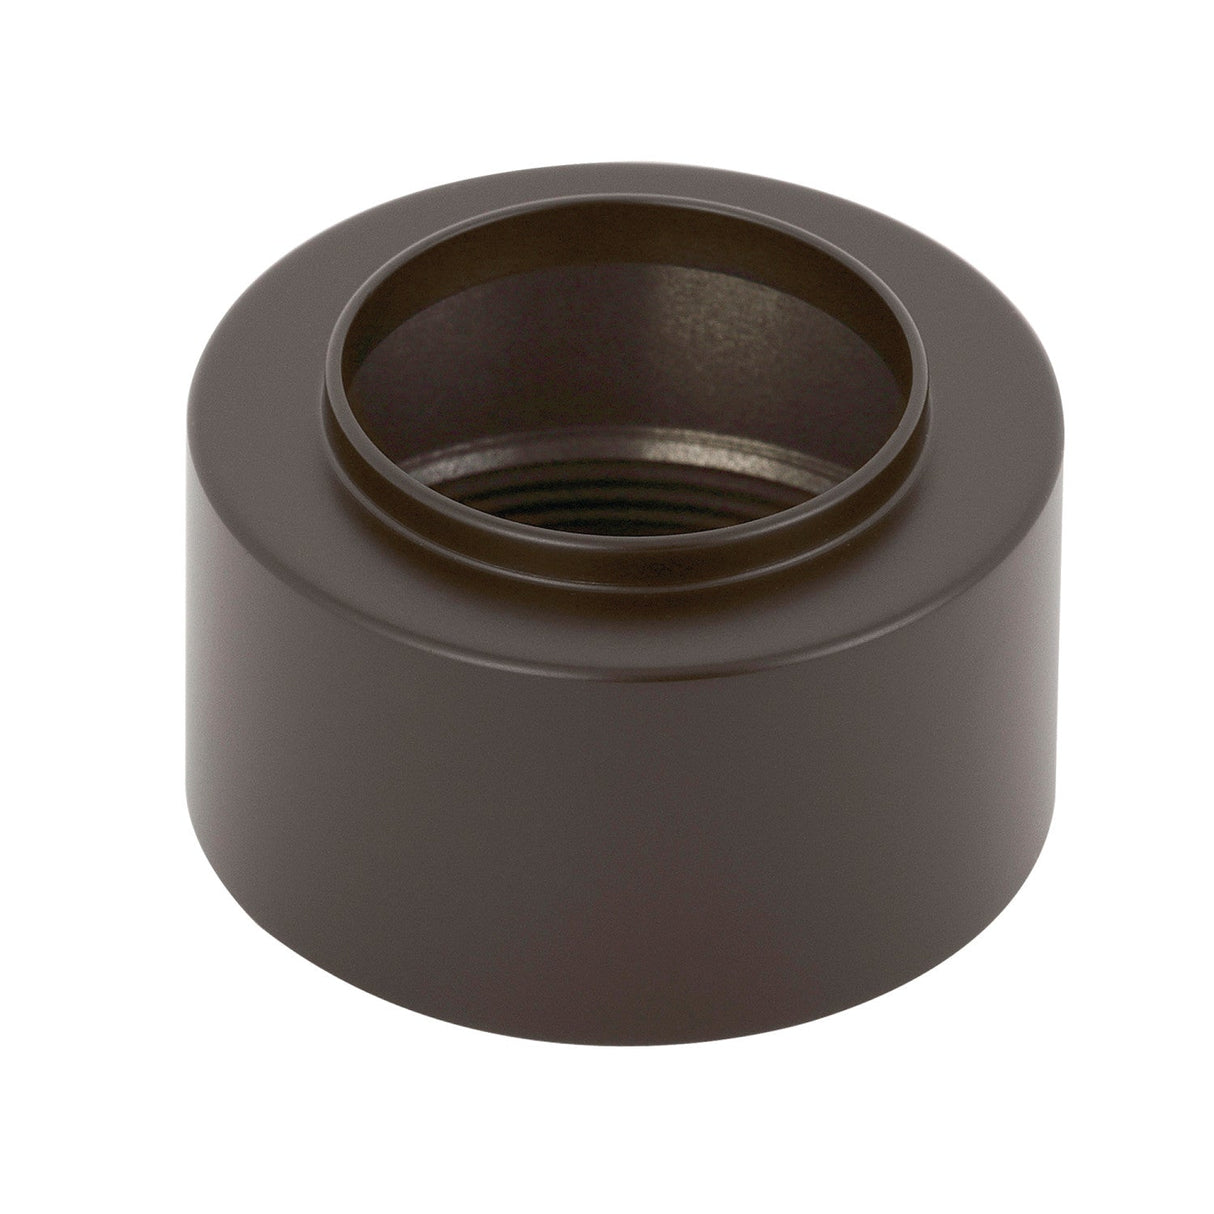 KST3035 Sleeve for Tub and Shower Faucet, Oil Rubbed Bronze